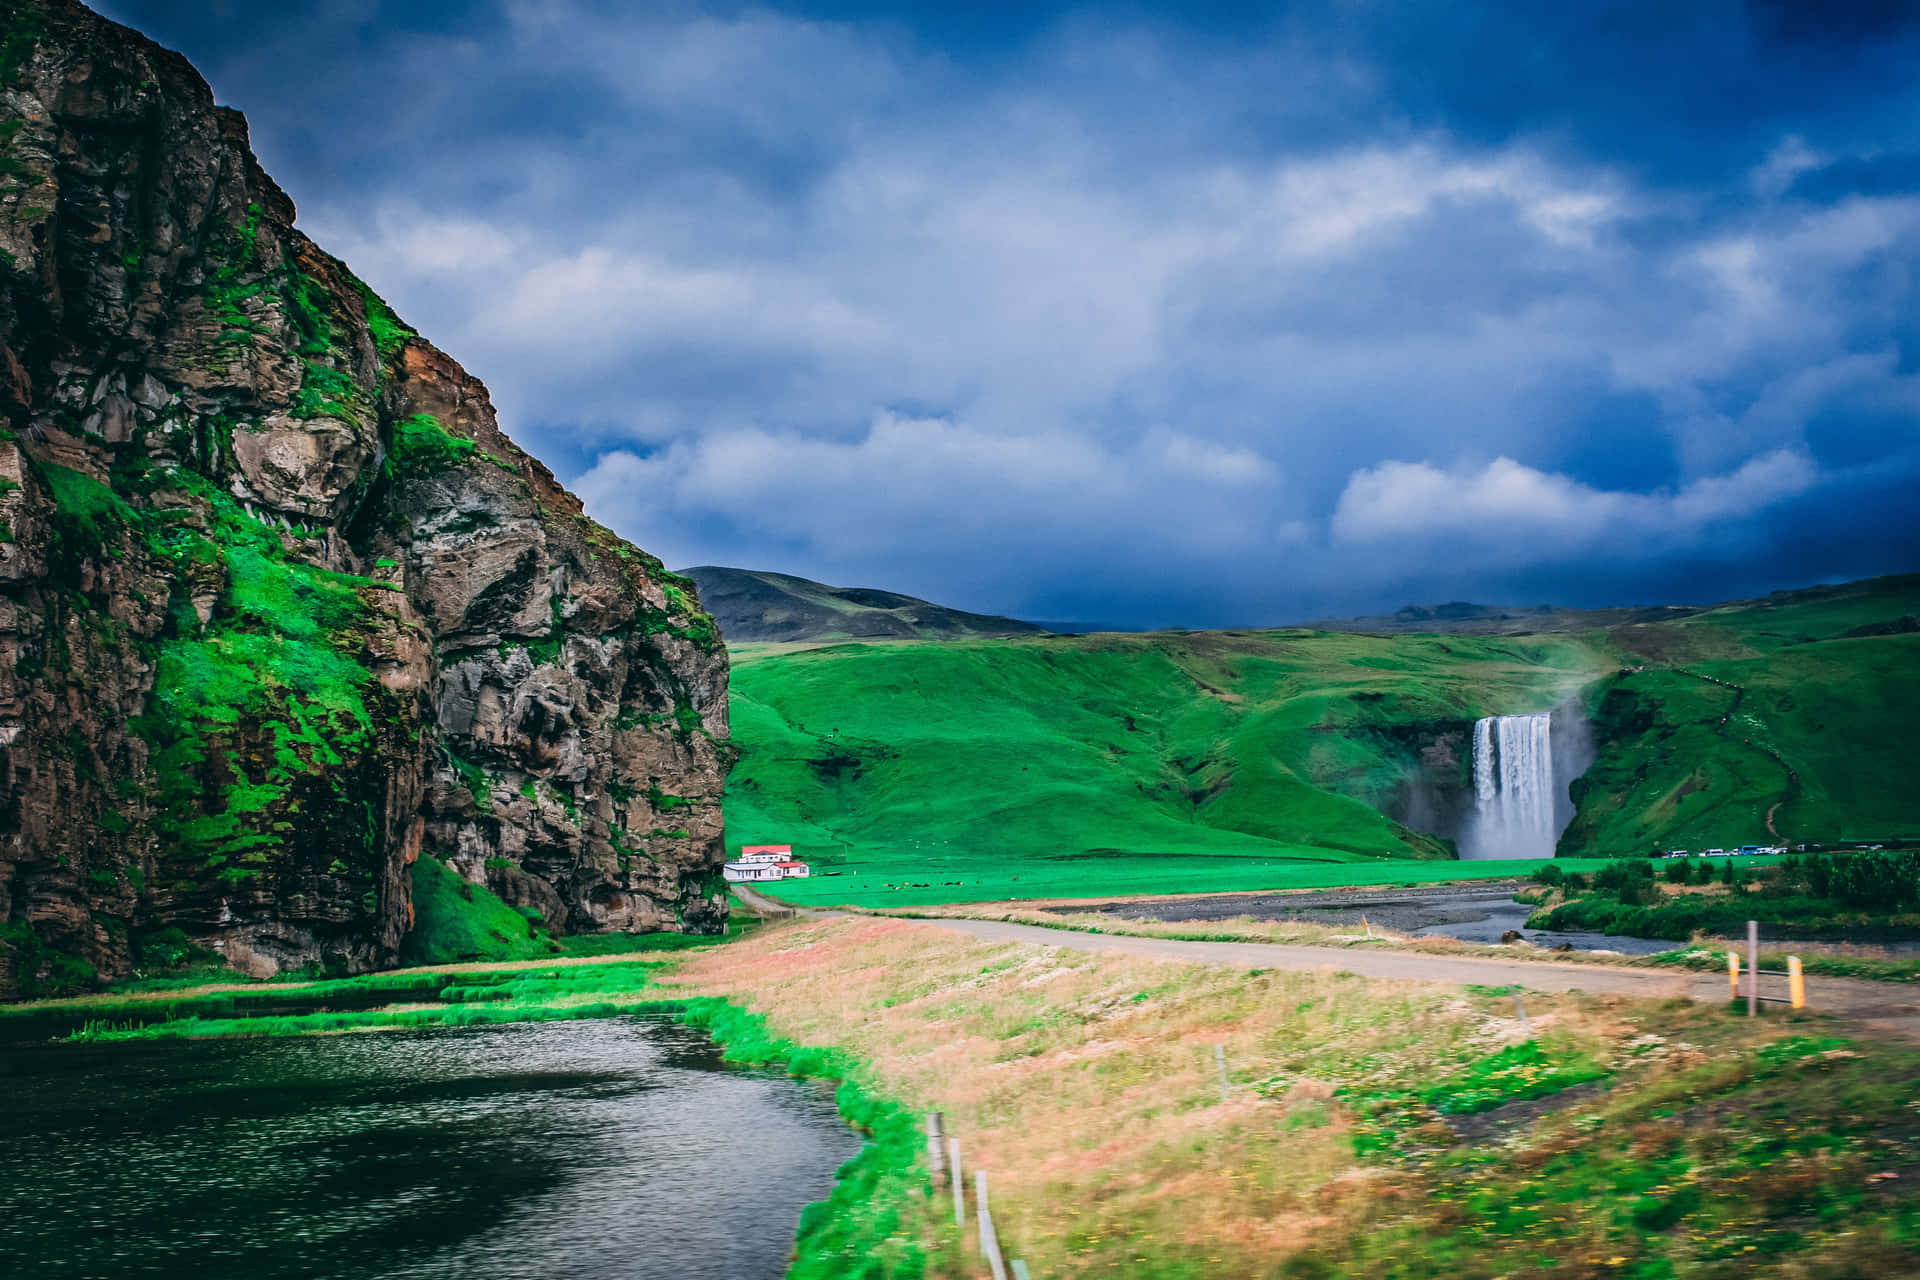 A picturesque escape to the otherworldly wonders of Iceland